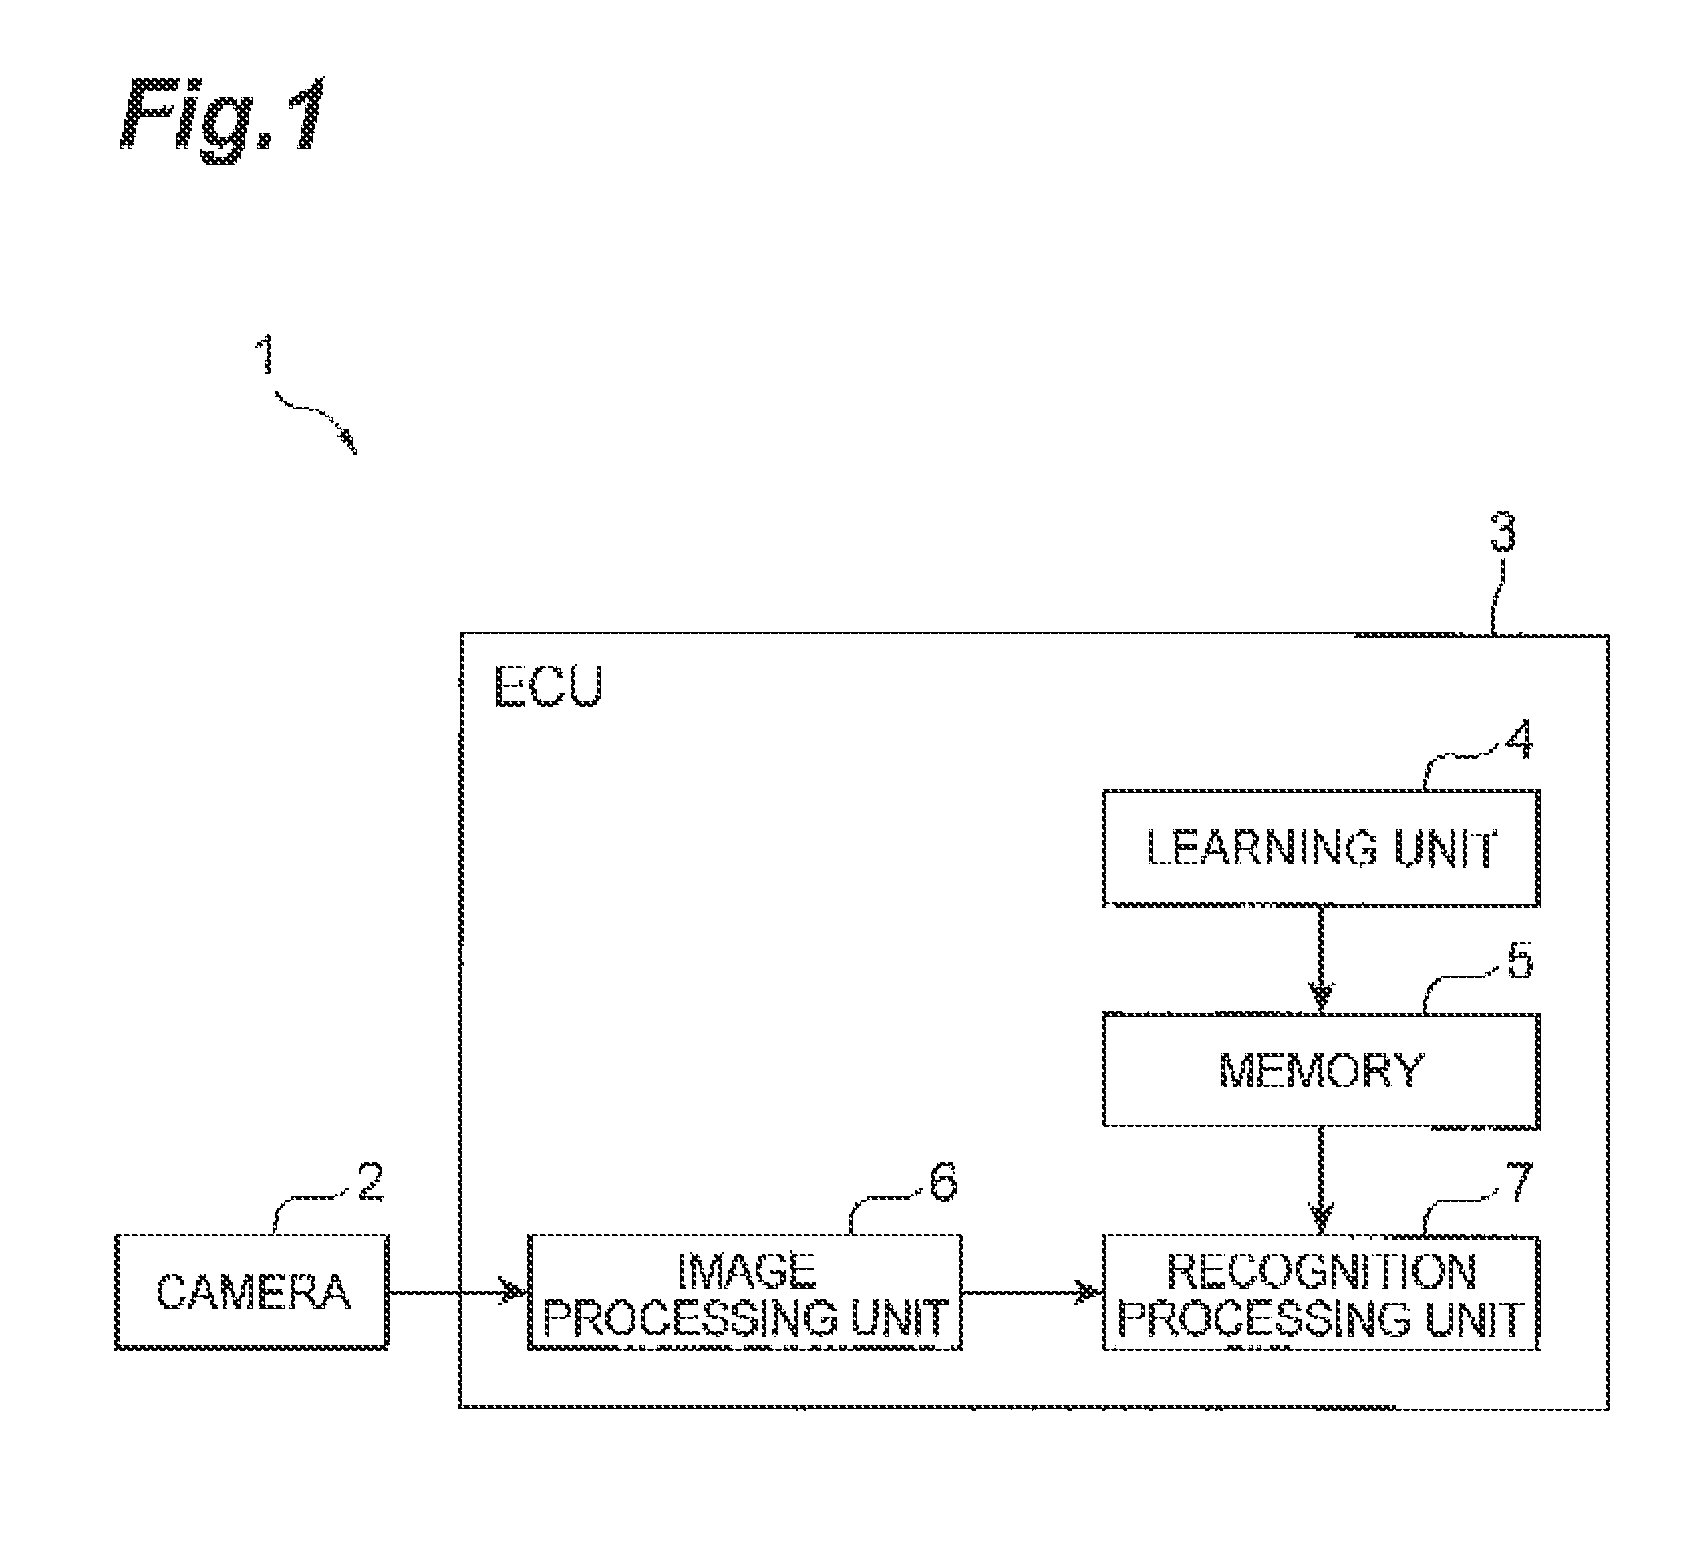 Object recognition device